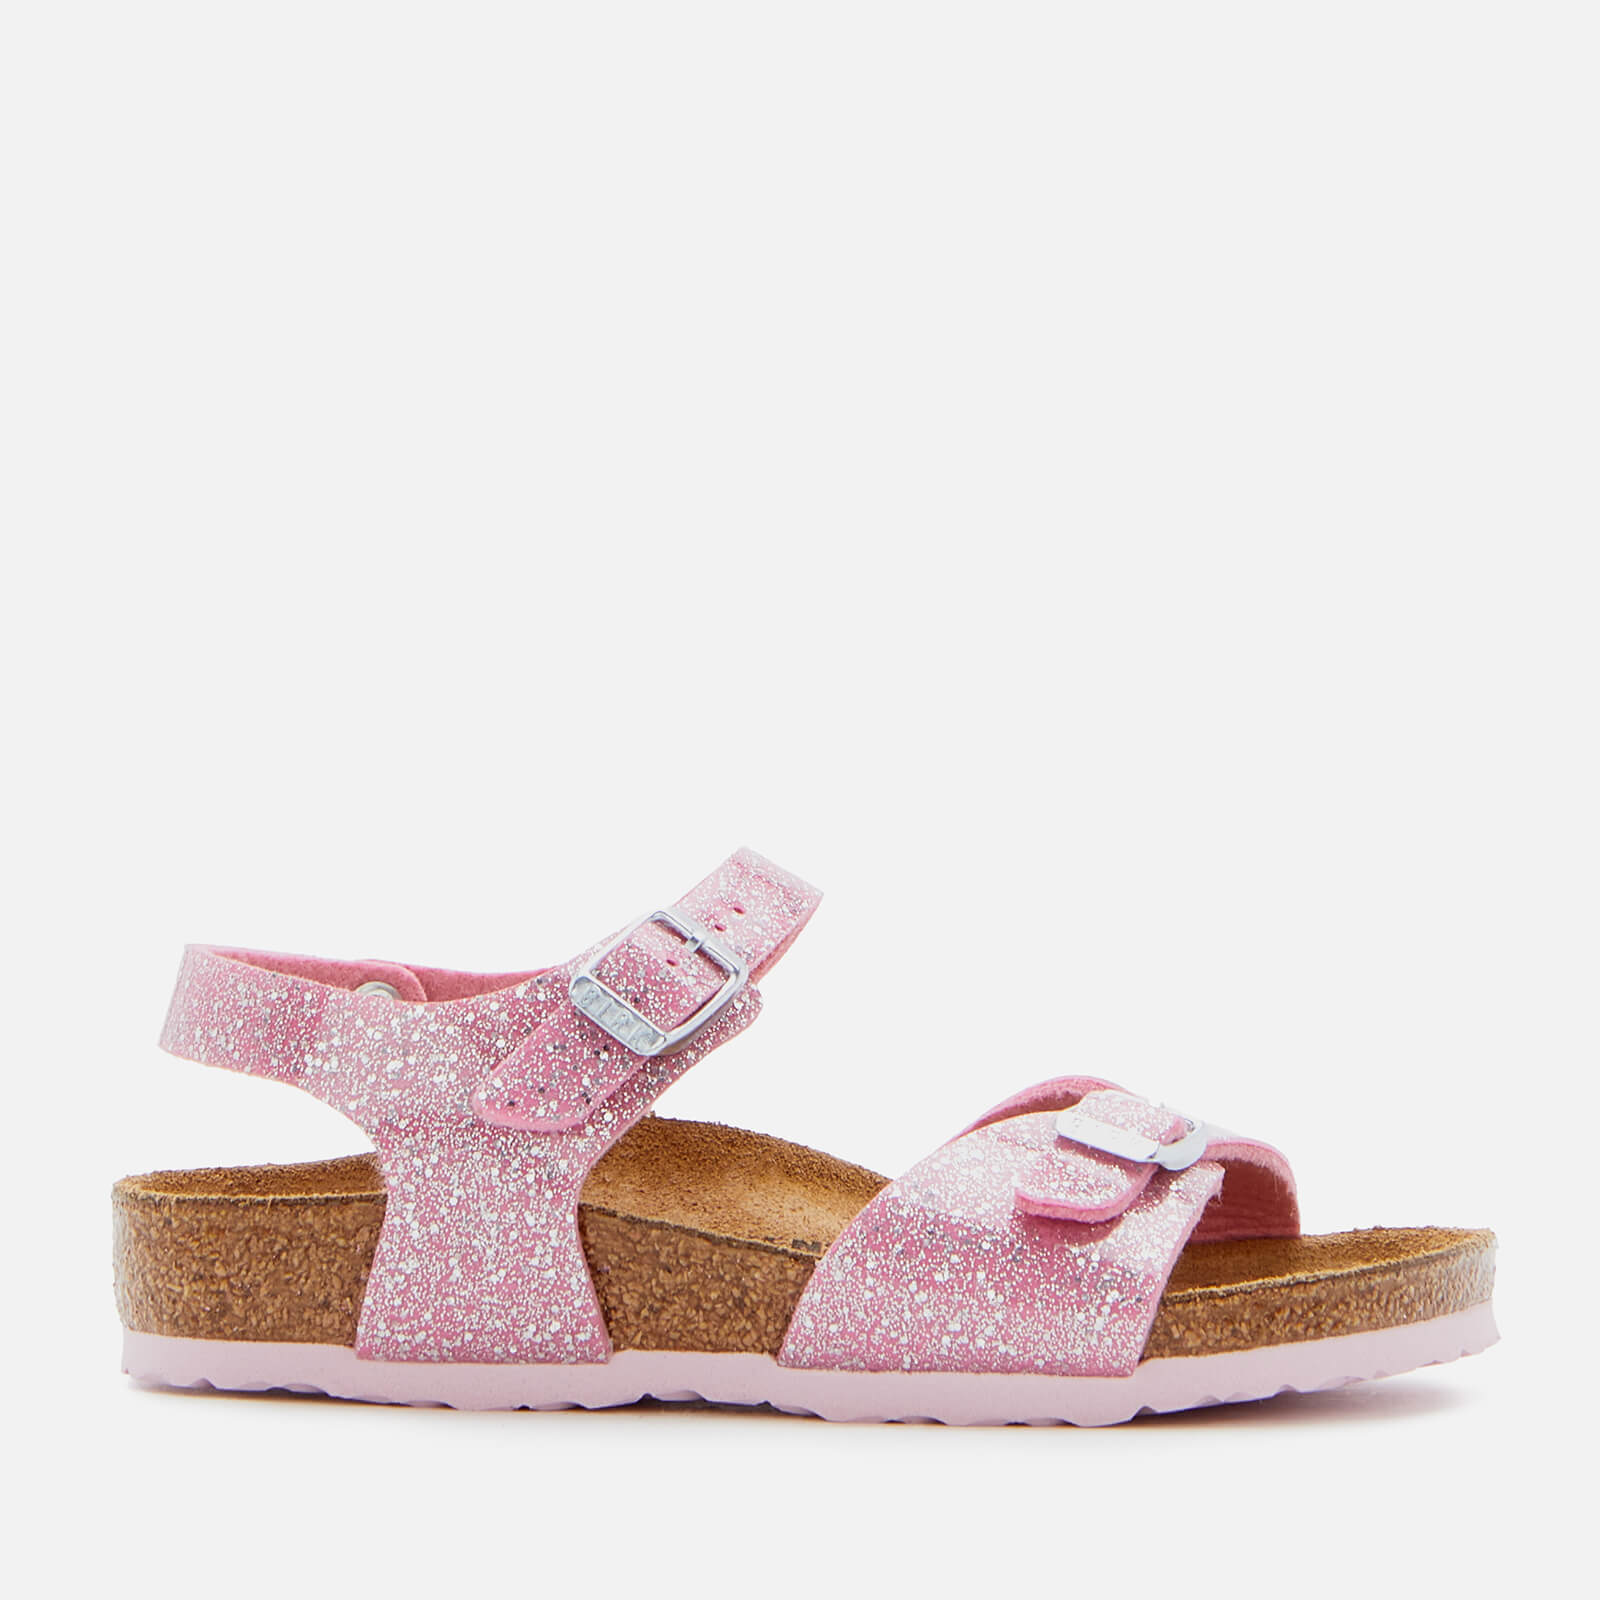 Birkenstock Rio Plain Sandals - Cosmic Sparkle Candy Pink - UK 8 Toddlers